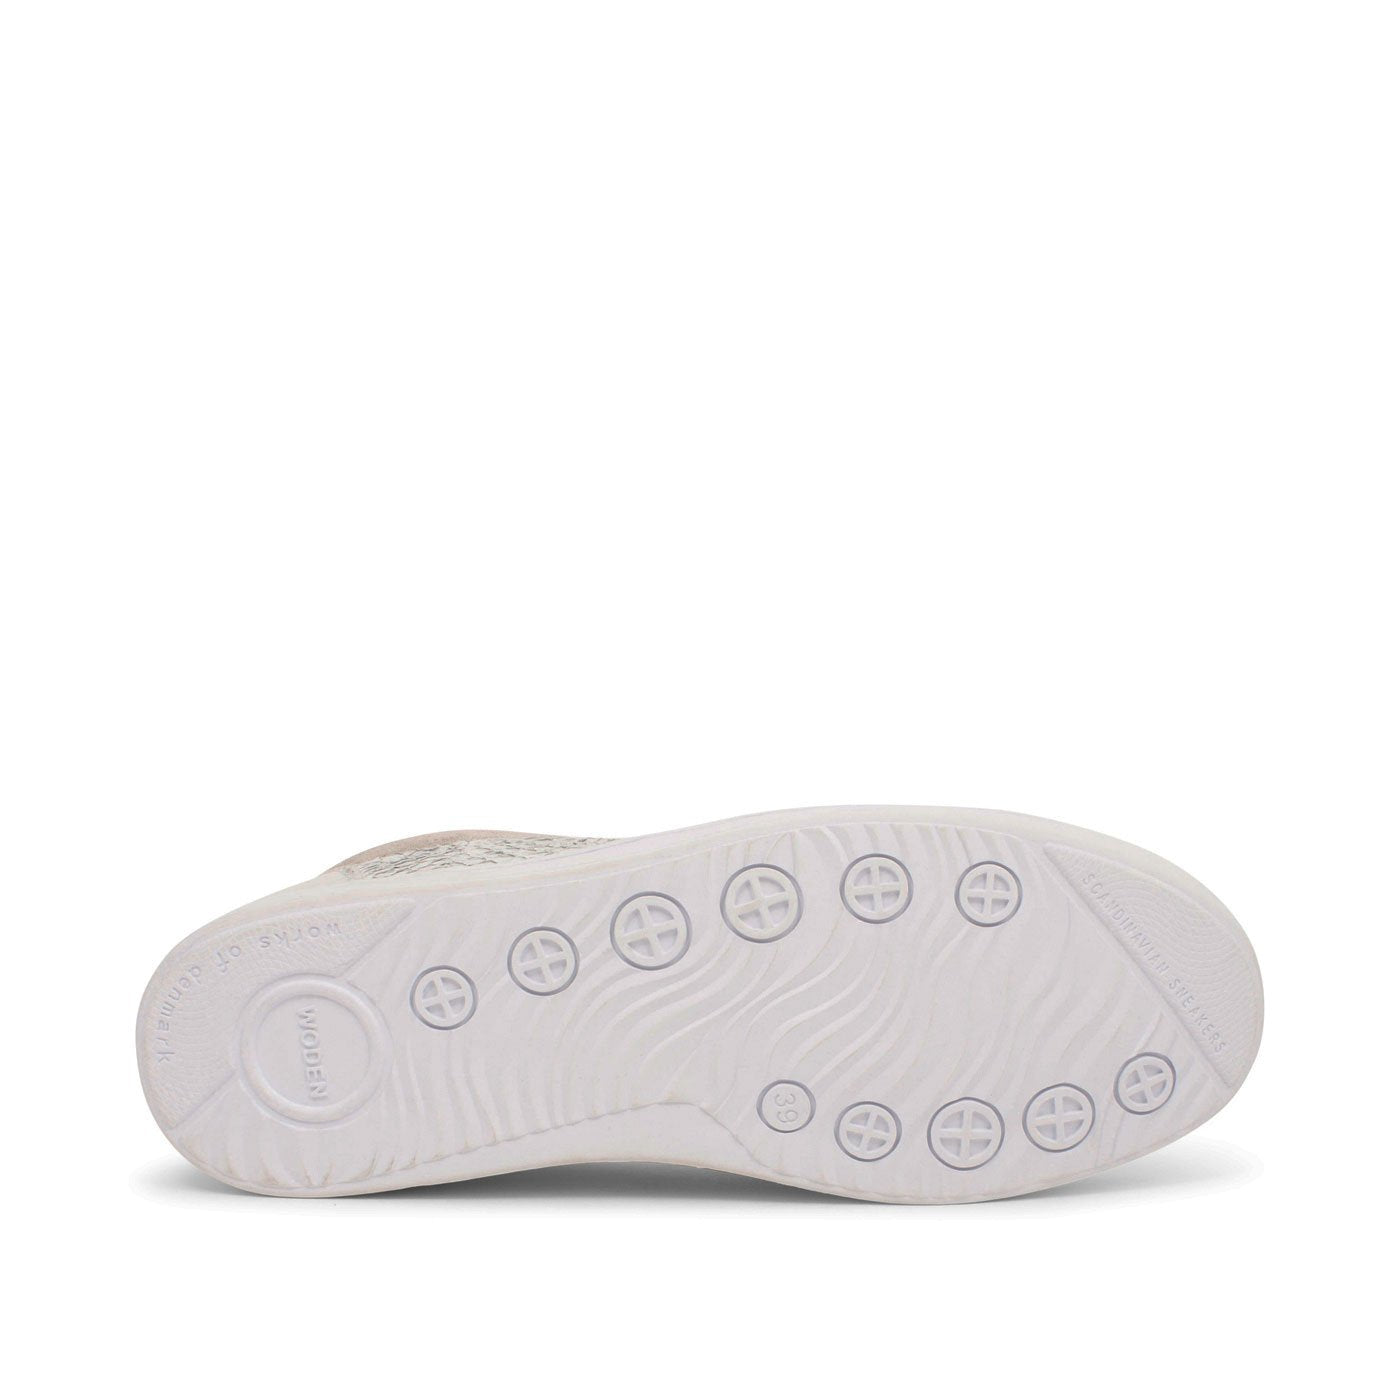 WODEN VILMA BRIGHT WHITE - Collective Shoes 